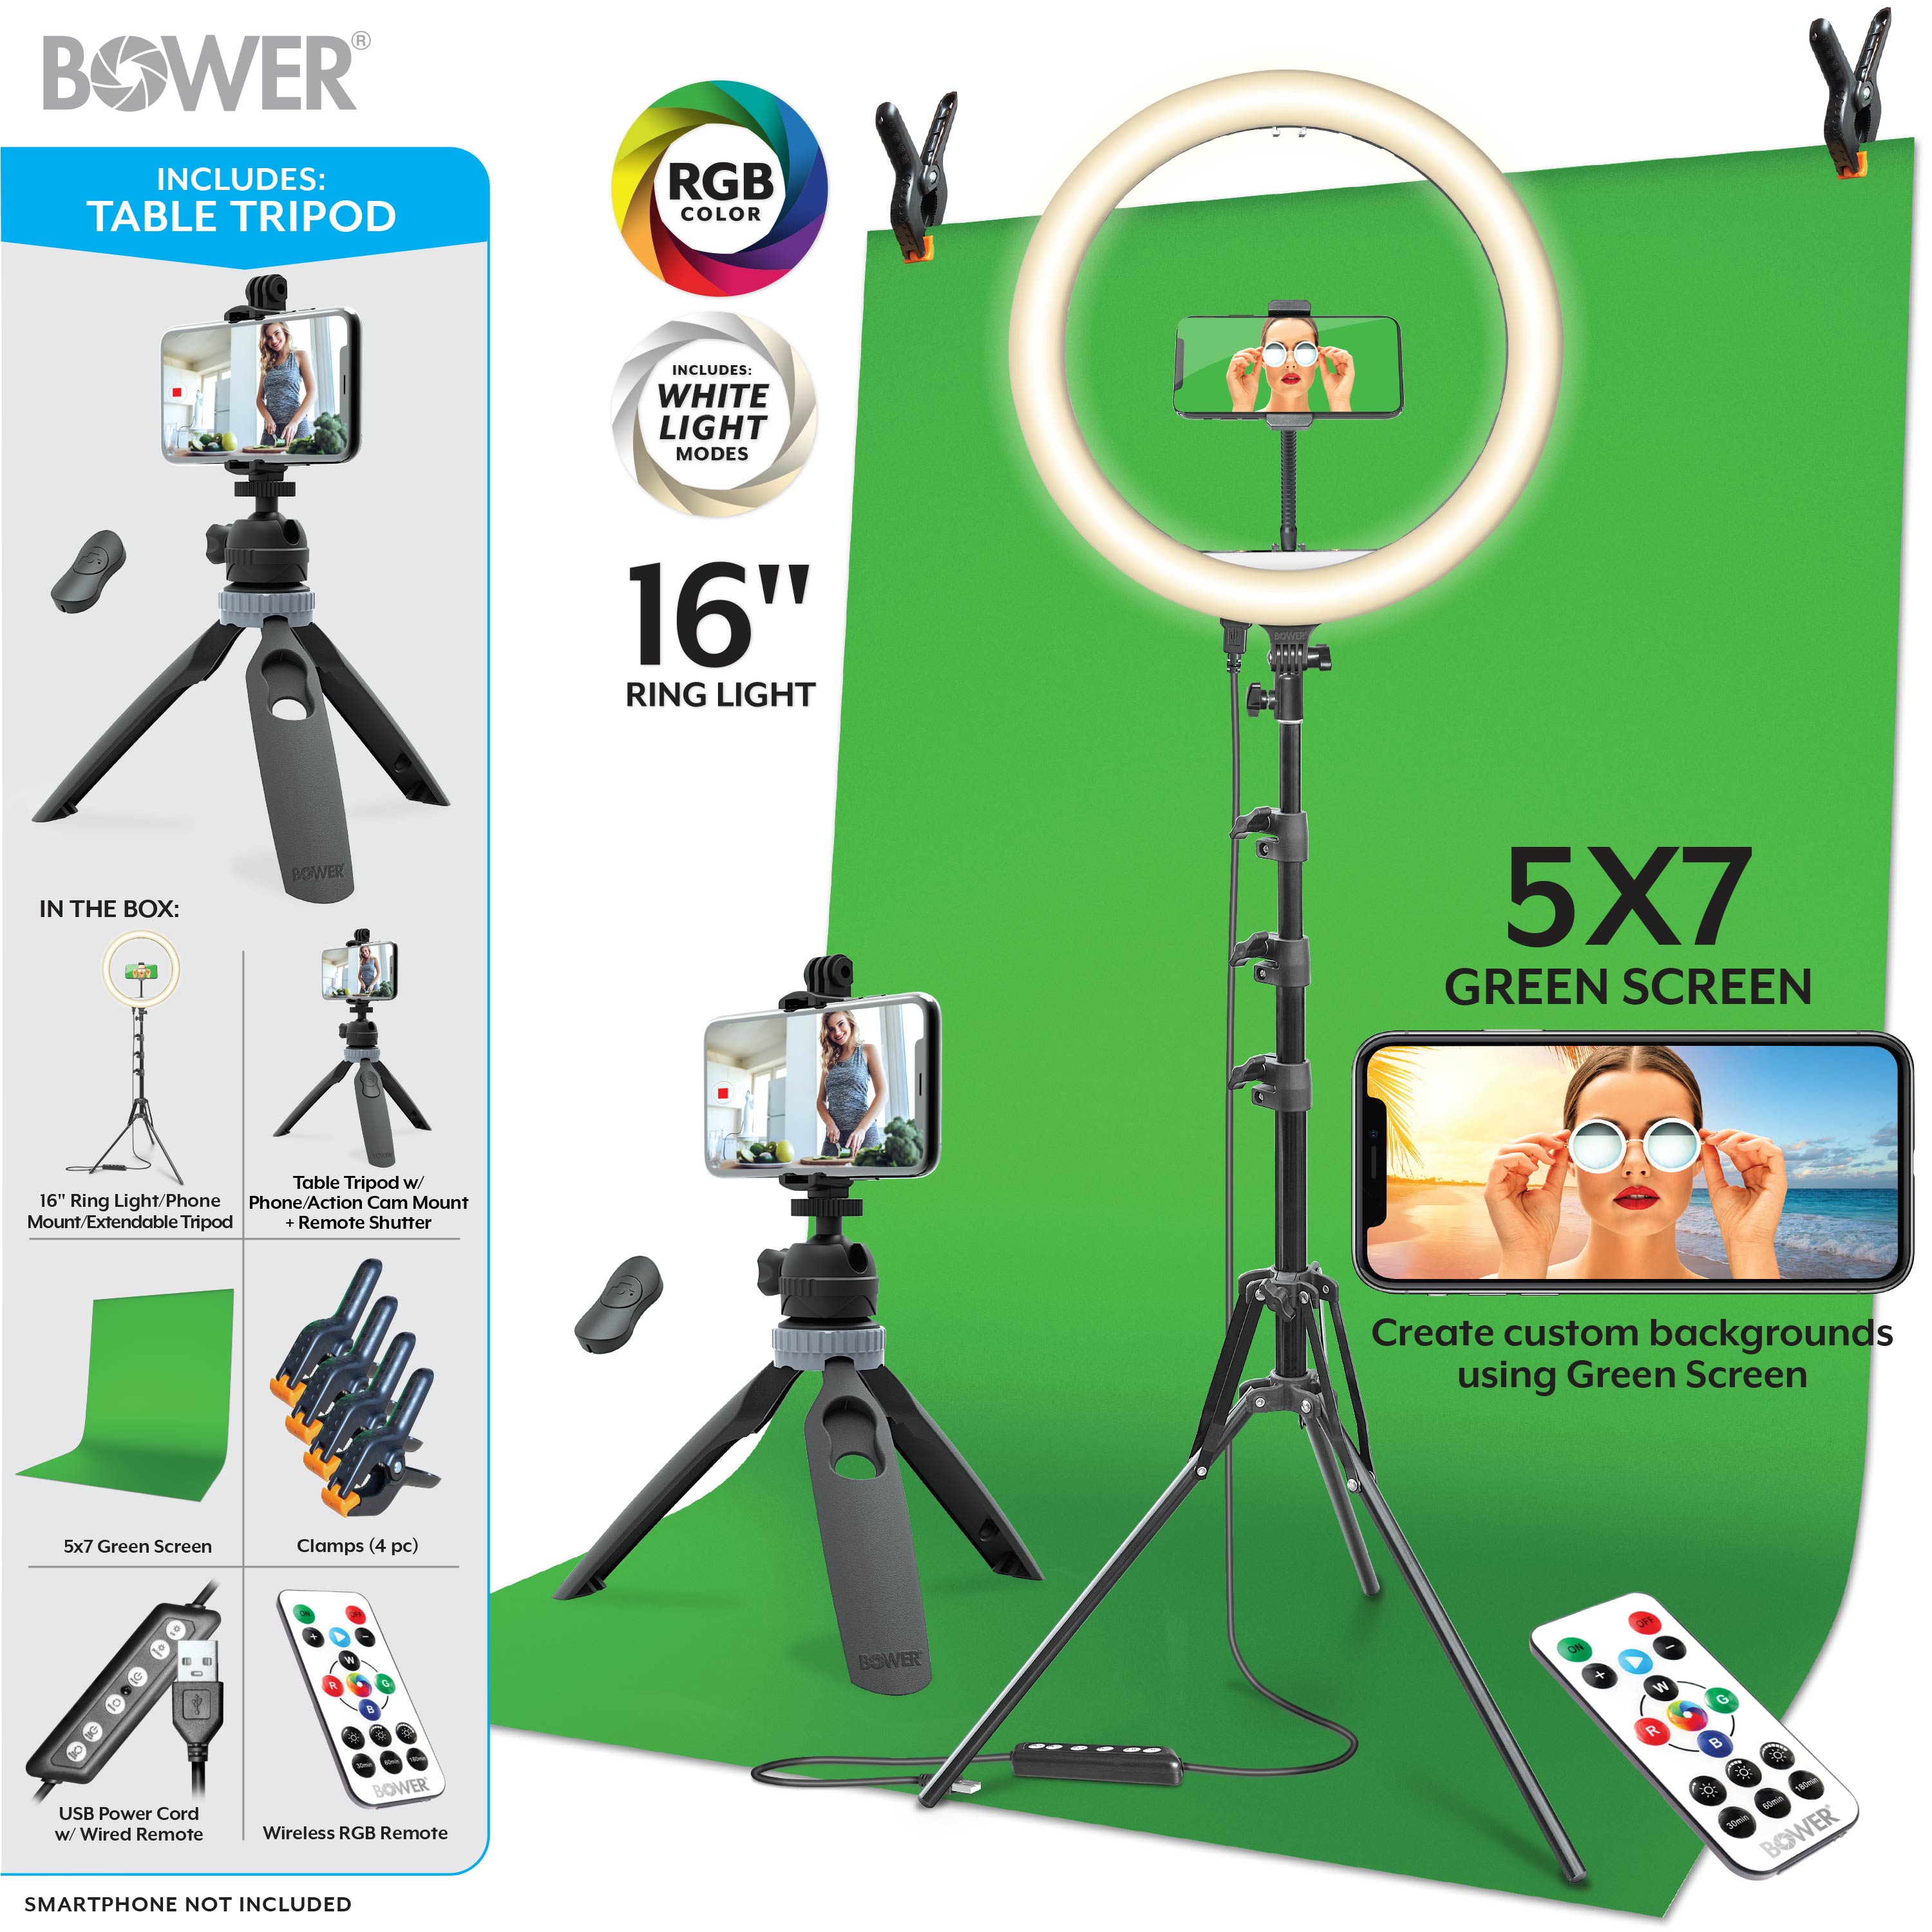 Bower Content Creator Kit with16-inch RGB Ring Light, 62-inch Adjustable Tripod, and Green Screen for Content Creation Camera Accessory - image 2 of 7